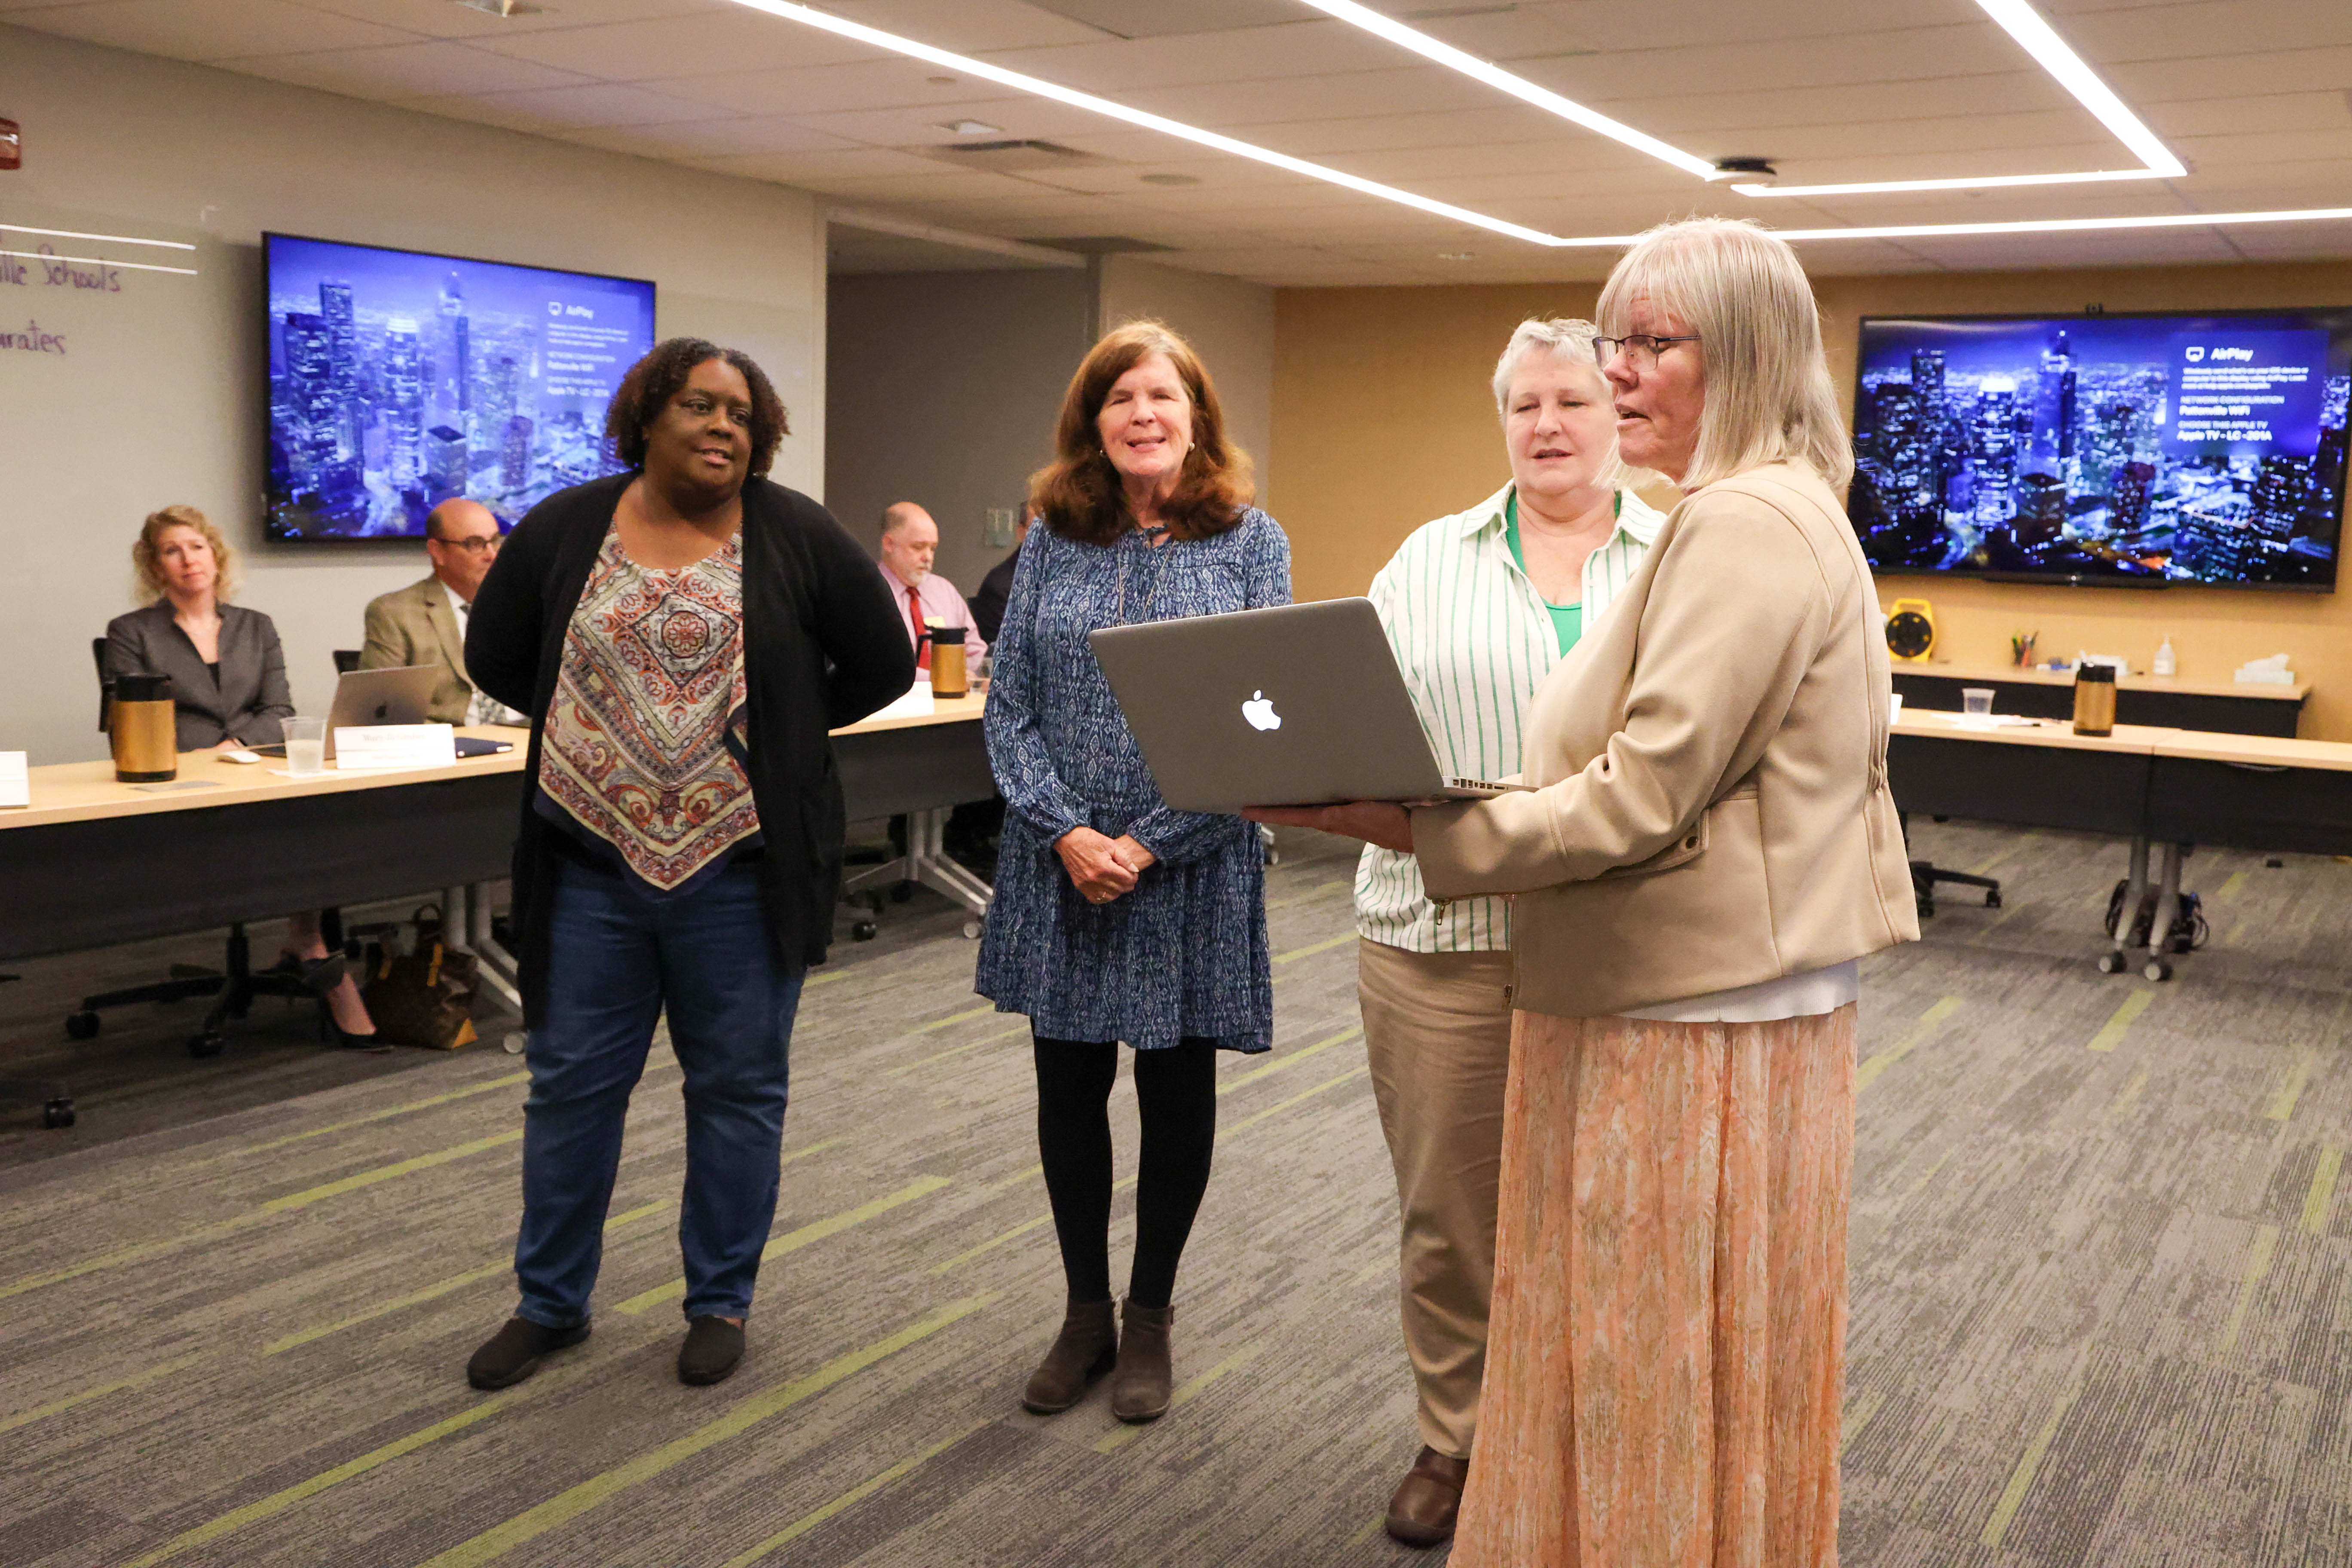 Three newly elected board members are sworn in by board president